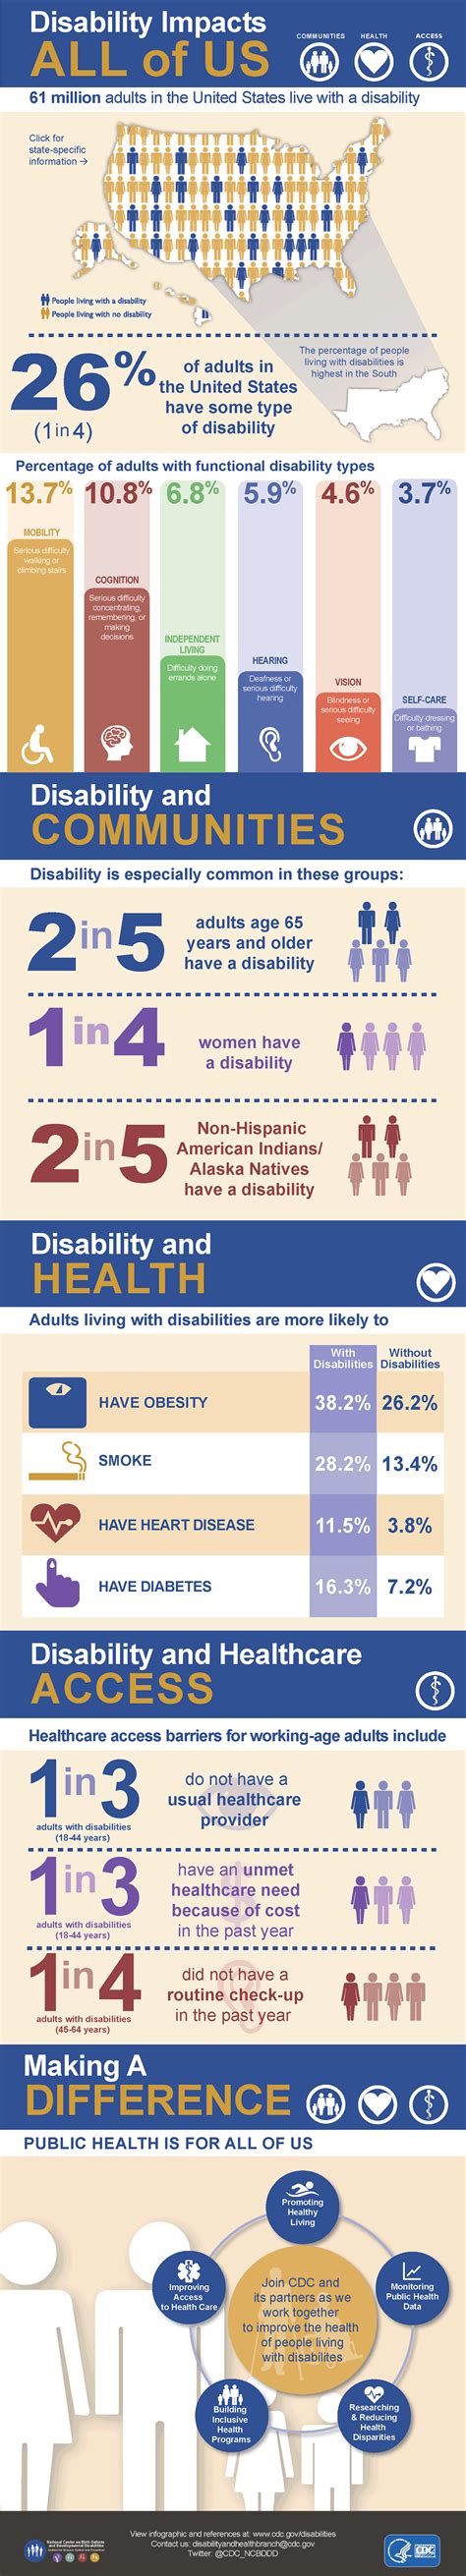 disability impacts all of us infographic disability and health